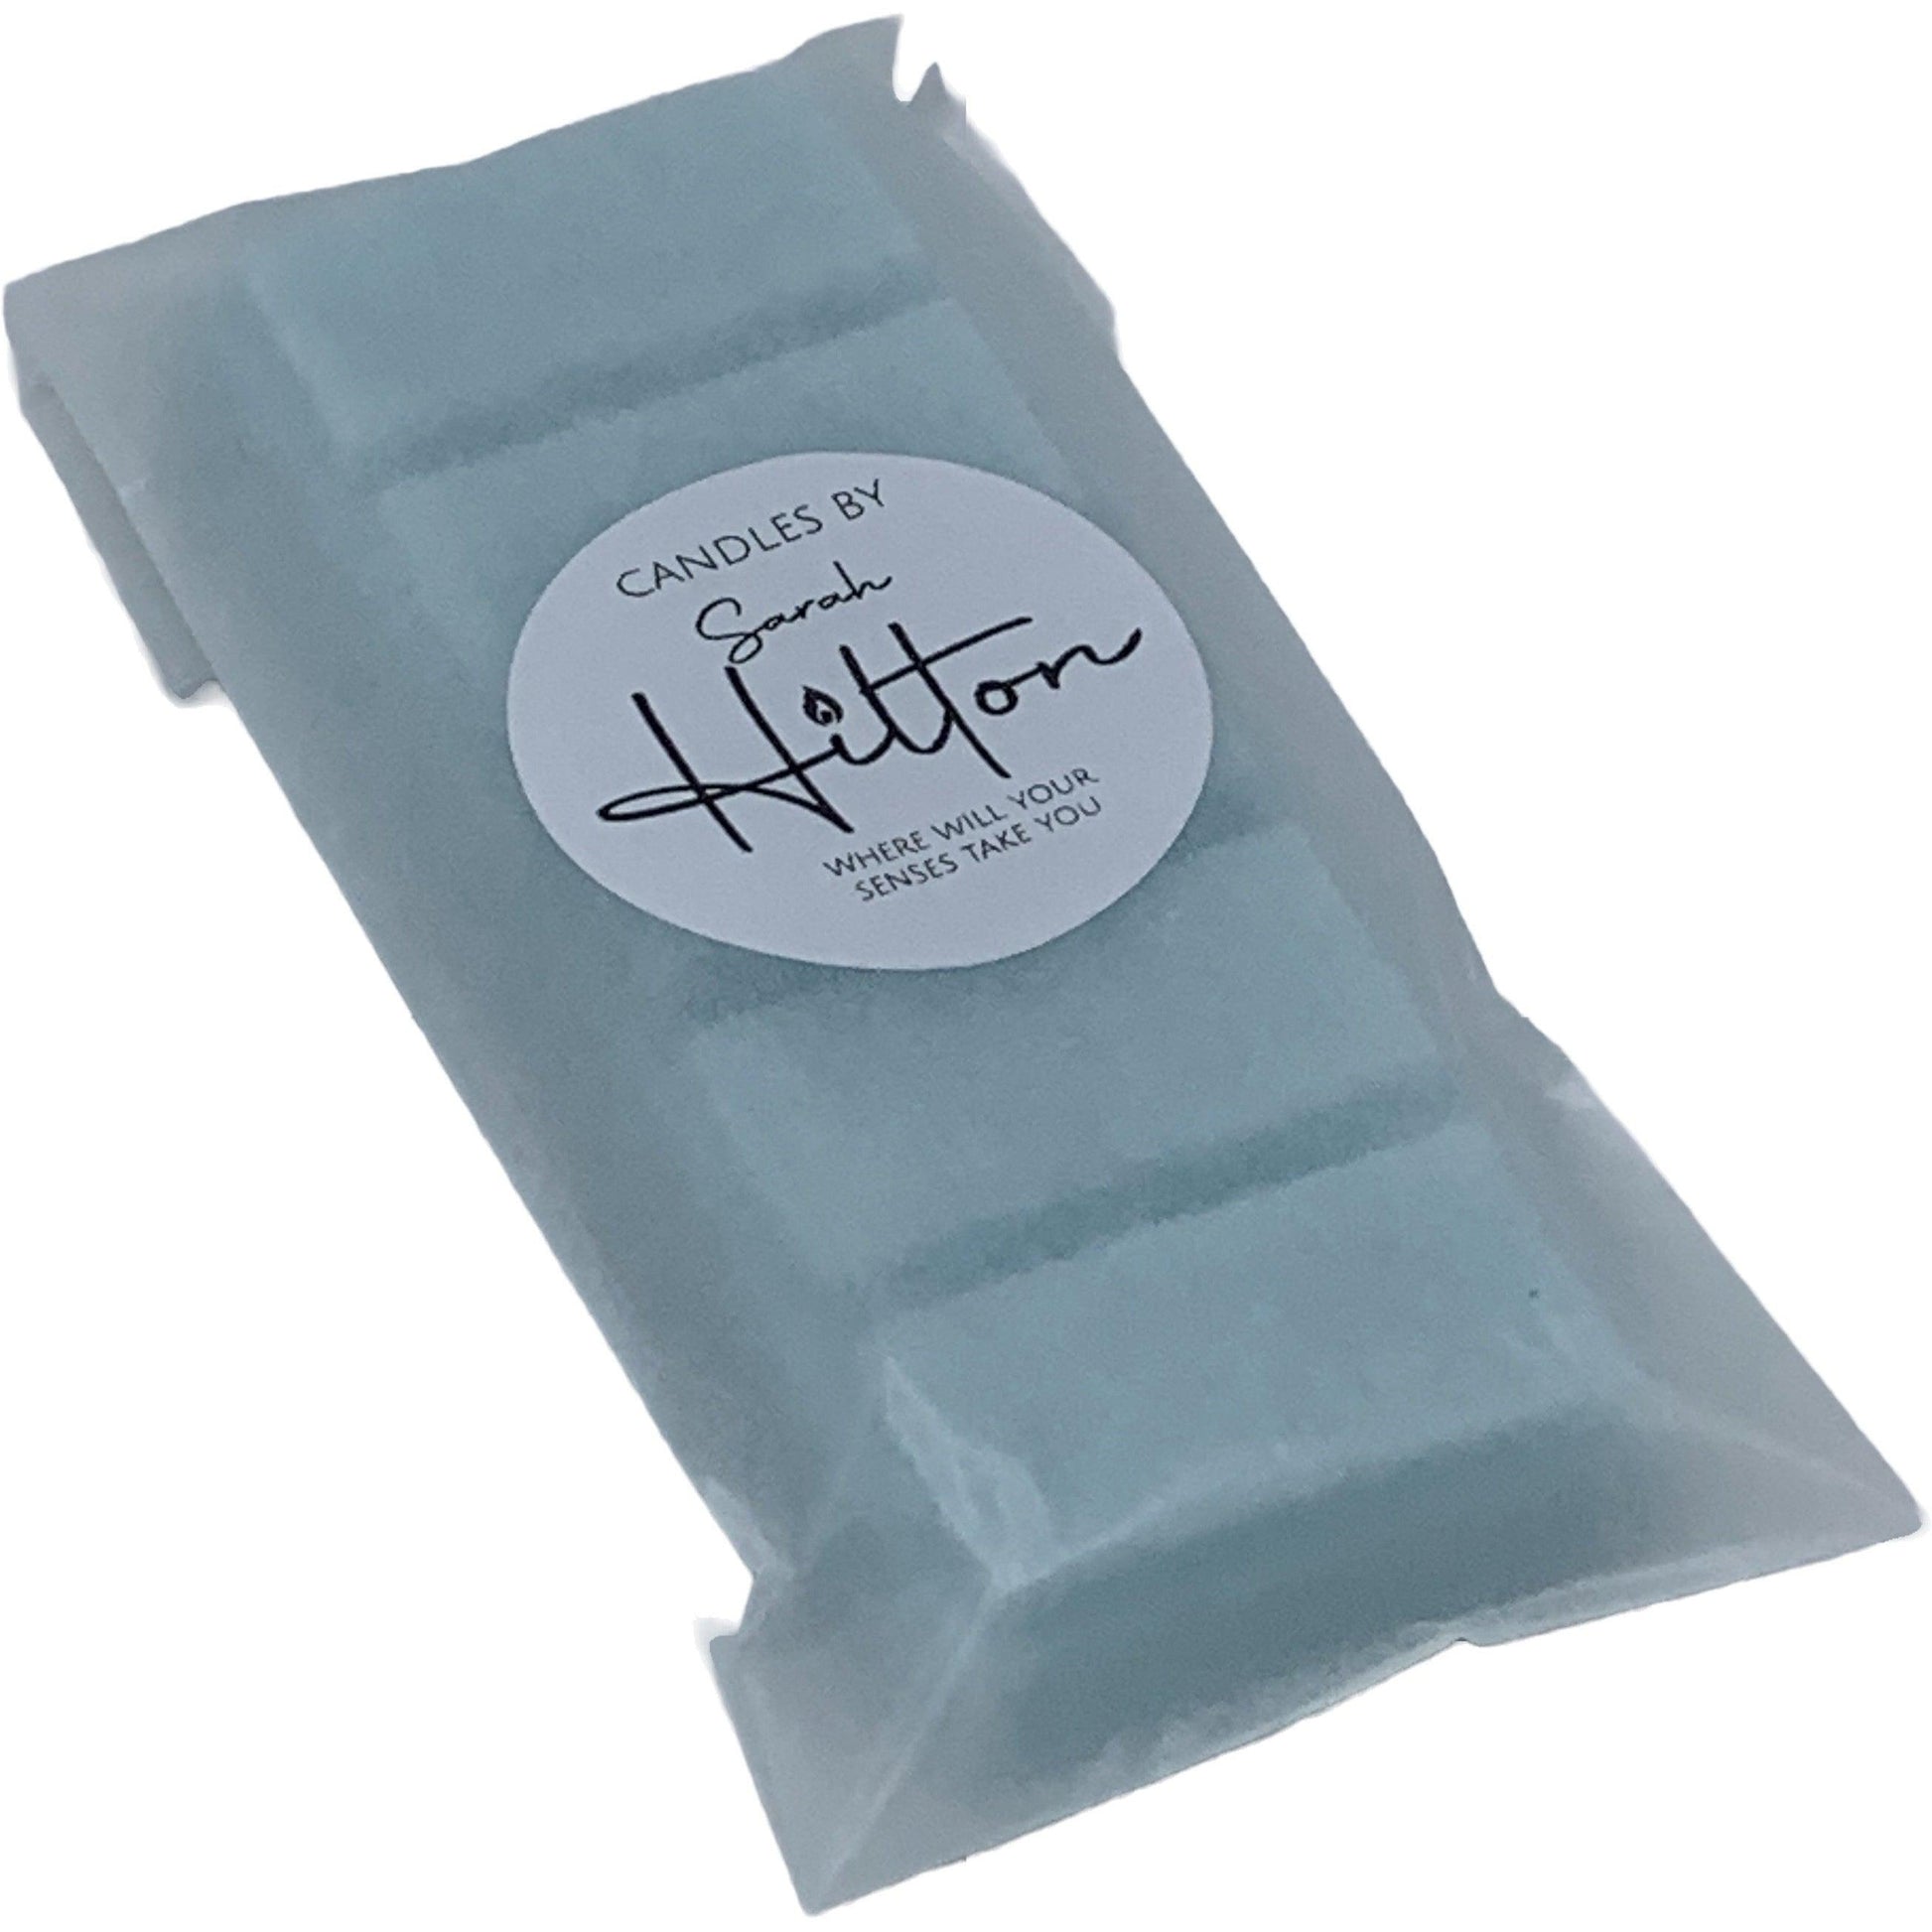 Cool Waters Wax Melt - Scents By Sarah Hilton